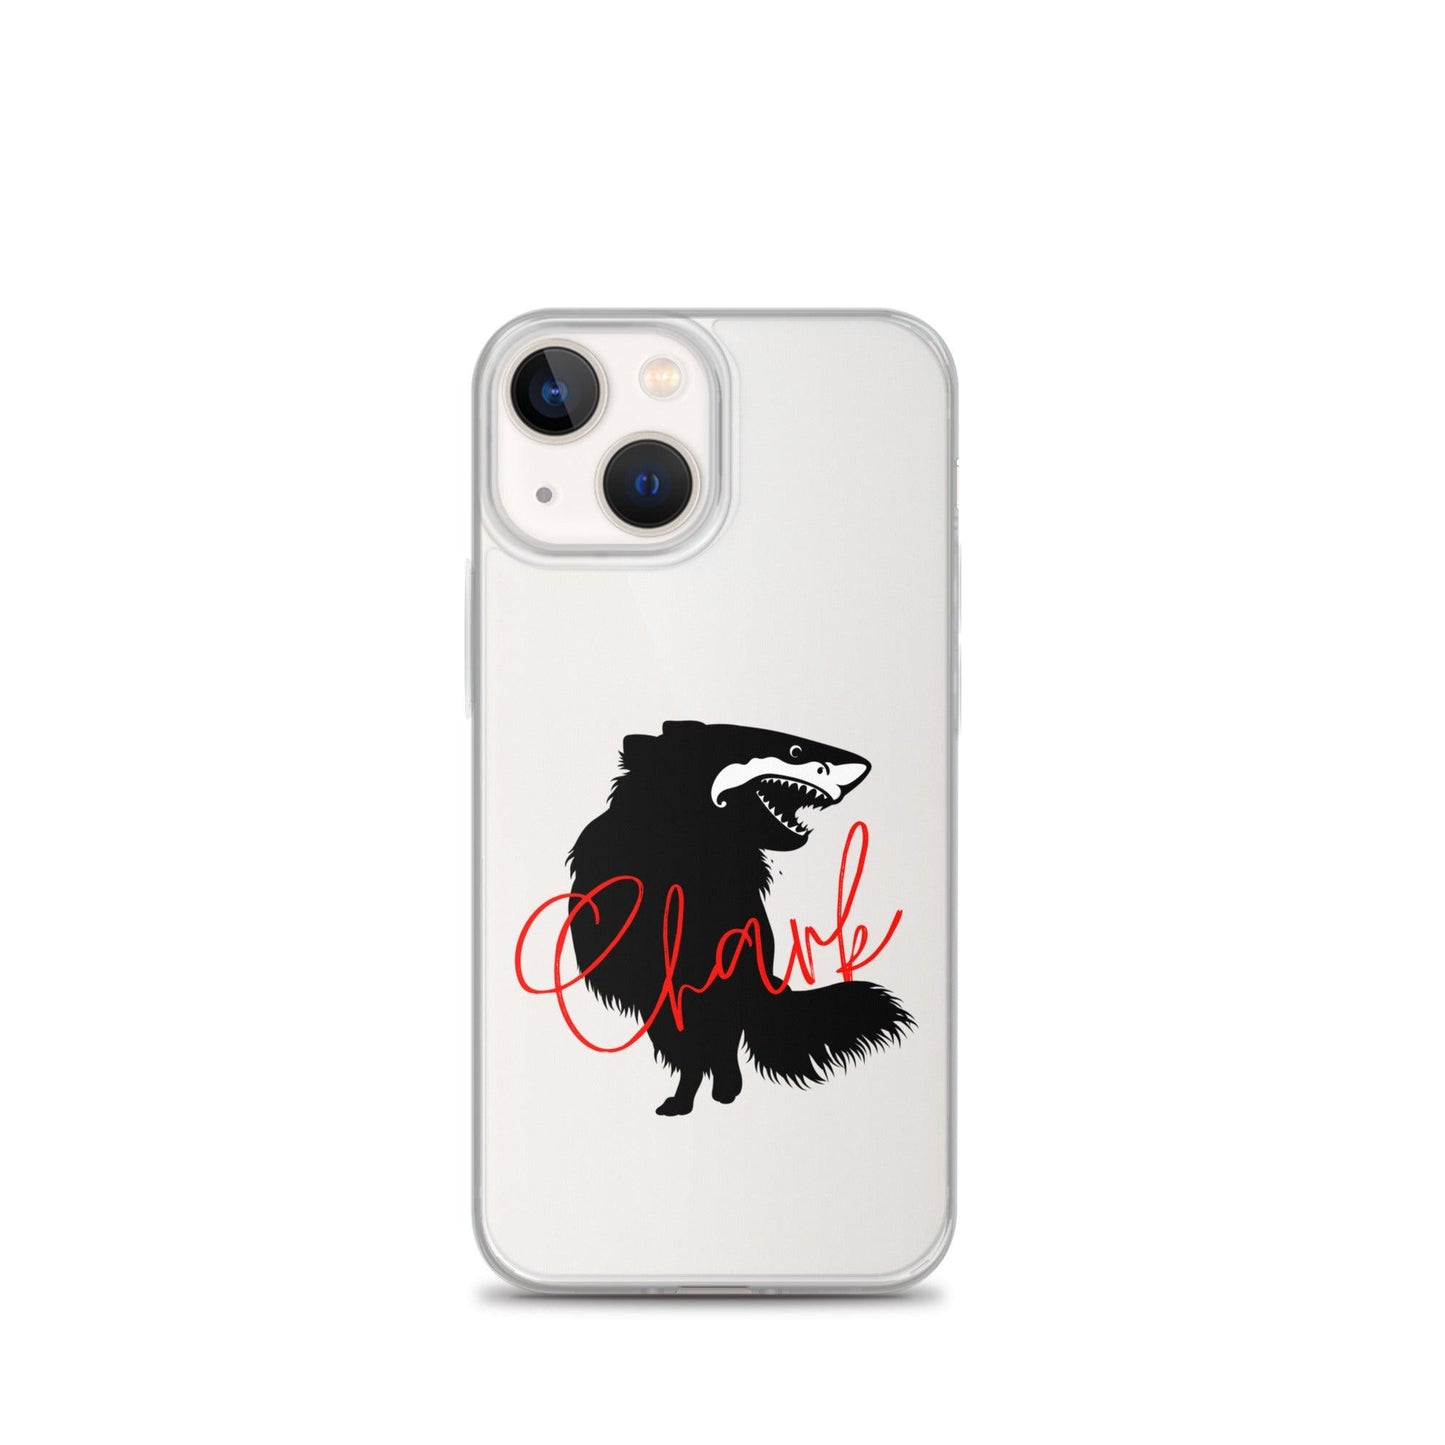 Chihuahua + Shark = Chark Clear iPhone case with the black silhouette of a longhaired chihuahua with the face of a great white shark - mouth open to show off jaws lined with lots of sharp white teeth. The word "Chark" is artfully placed in red cursive font over the image. For trendy chi lovers. iPhone 13 mini case.